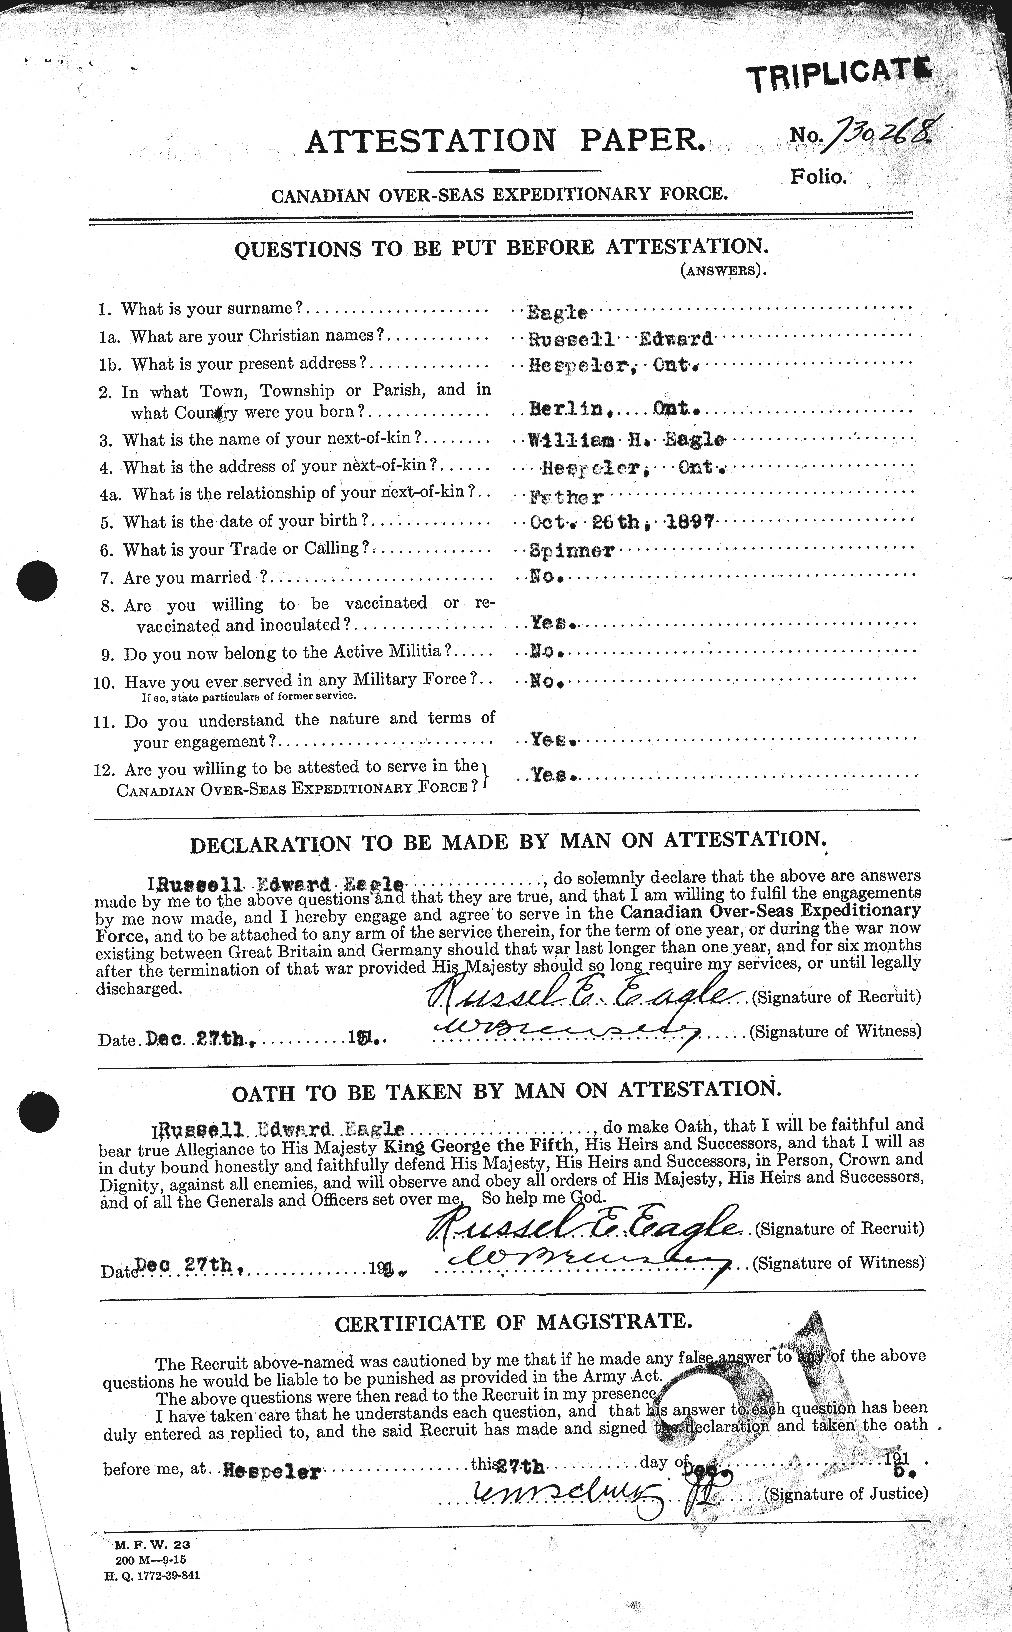 Personnel Records of the First World War - CEF 308846a